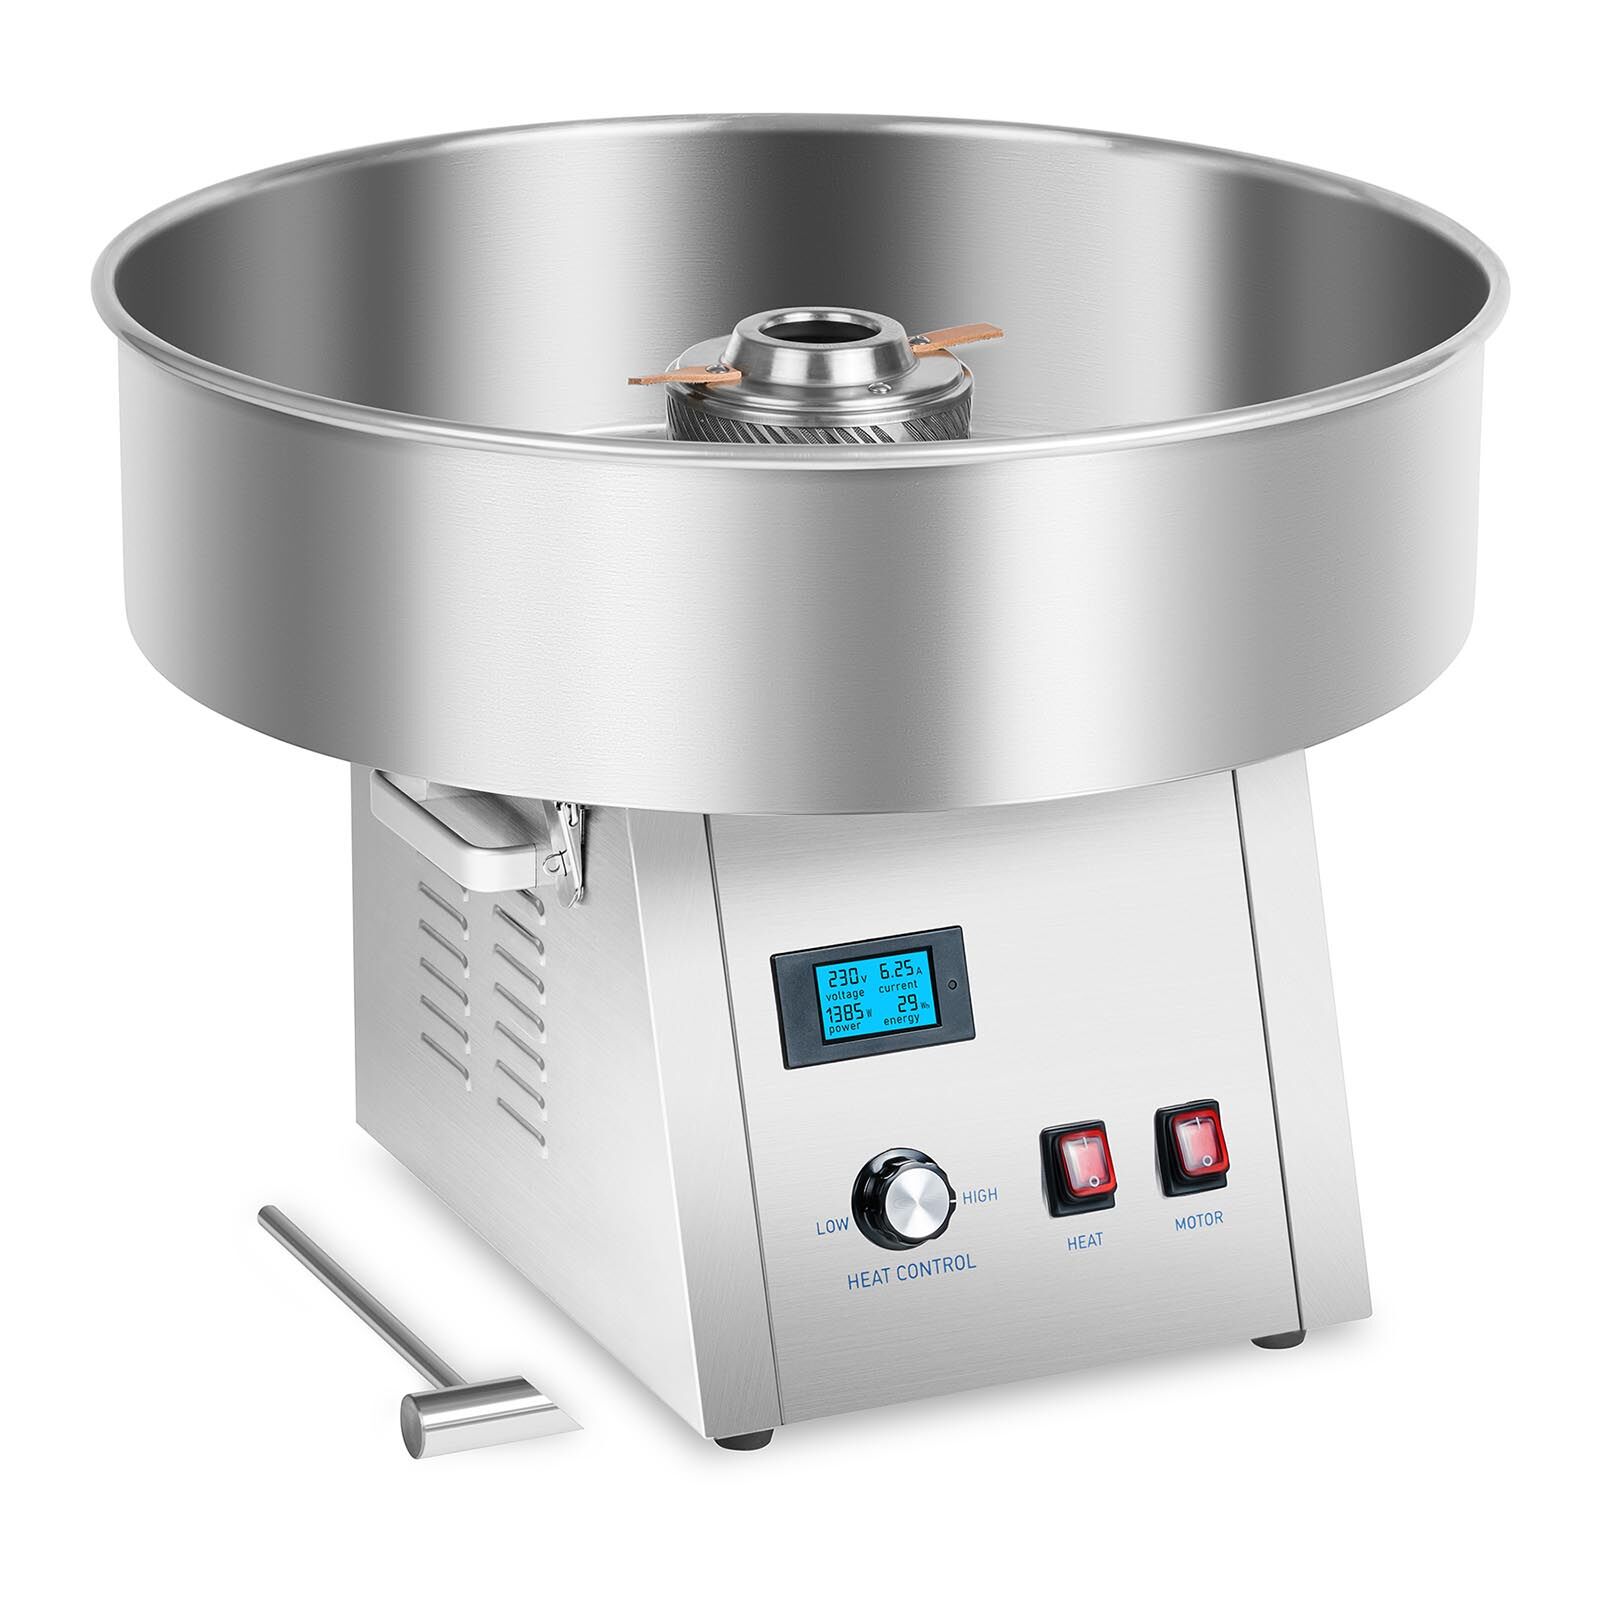 Royal Catering Factory seconds Candy Floss Machine - Stainless Steel - 62cm RCZK-1500S-W